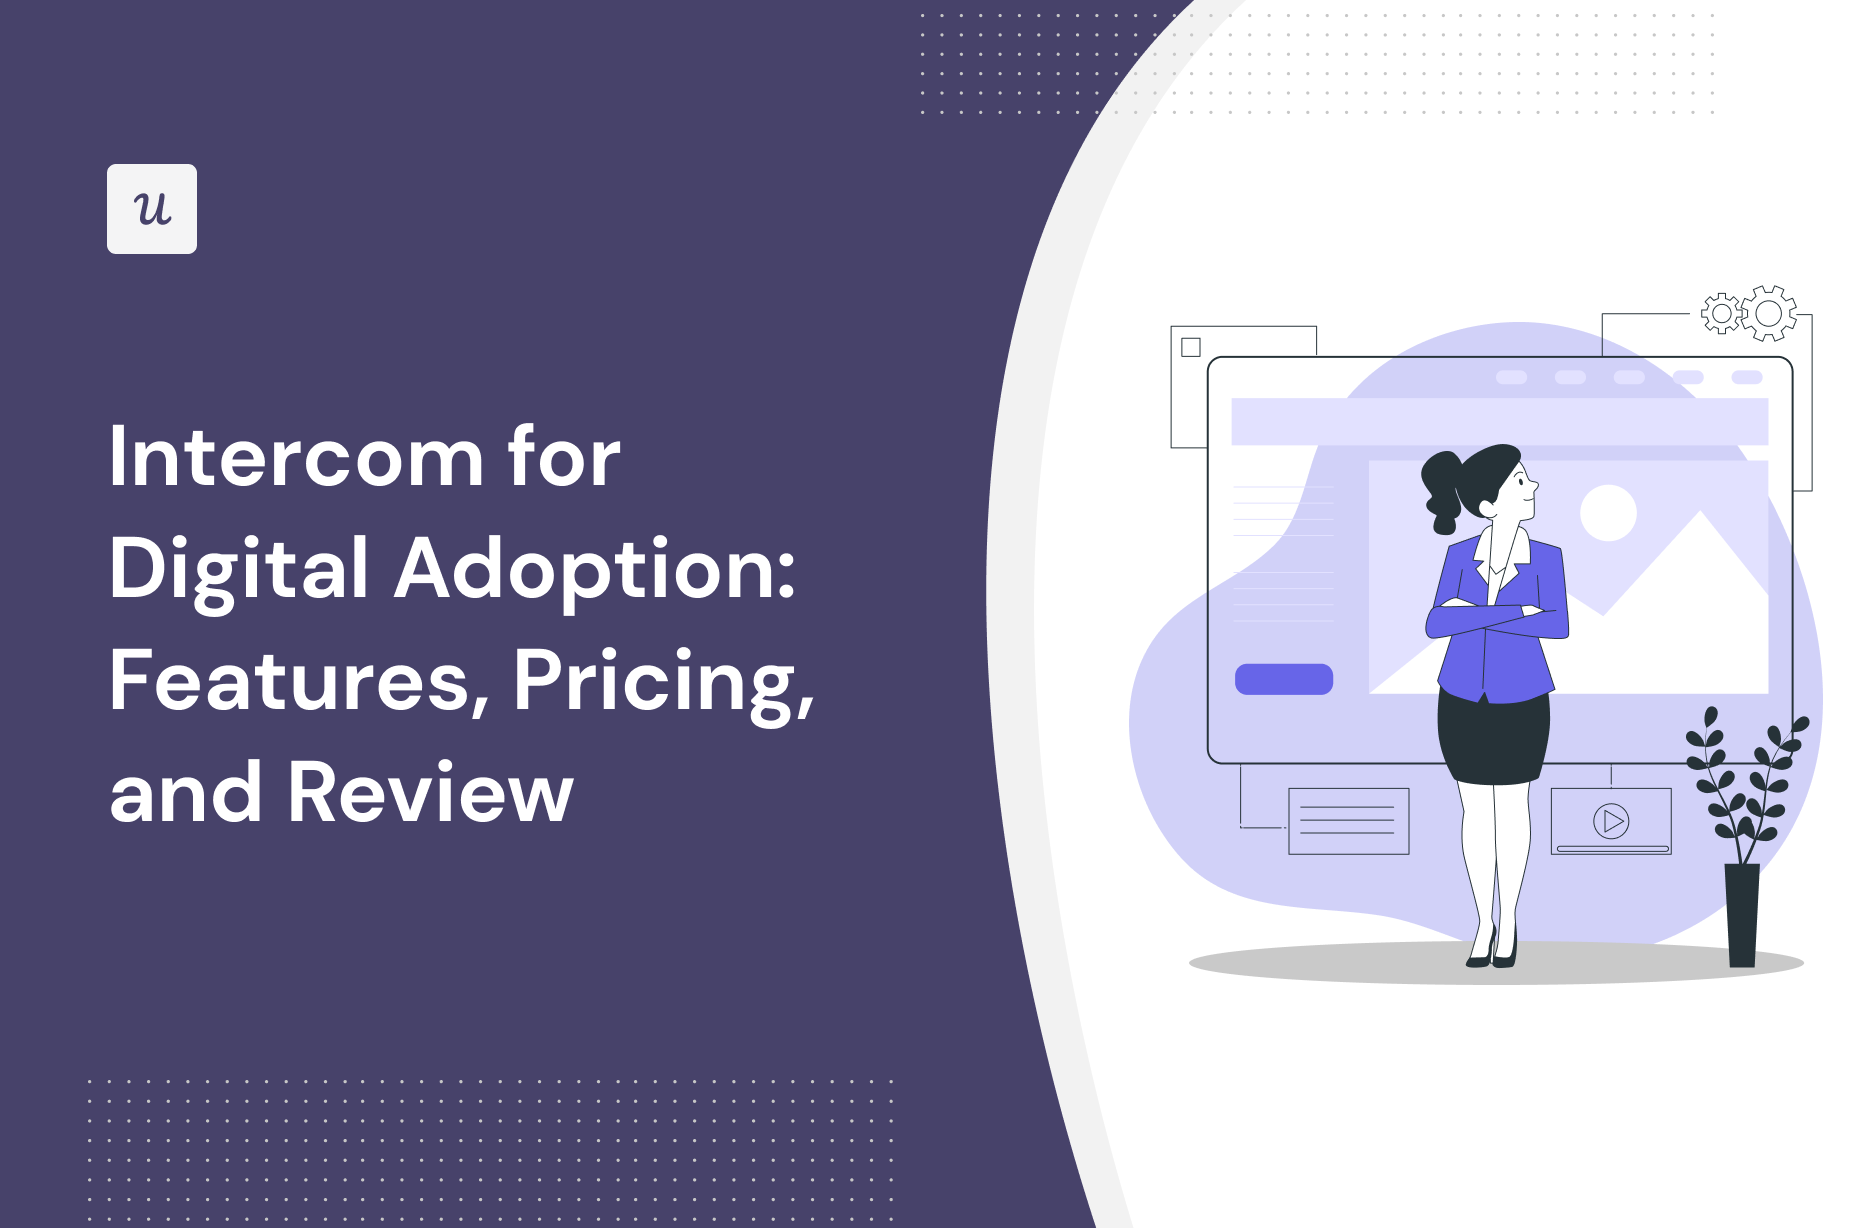 Intercom for Digital adoption: Features, Pricing, and Review